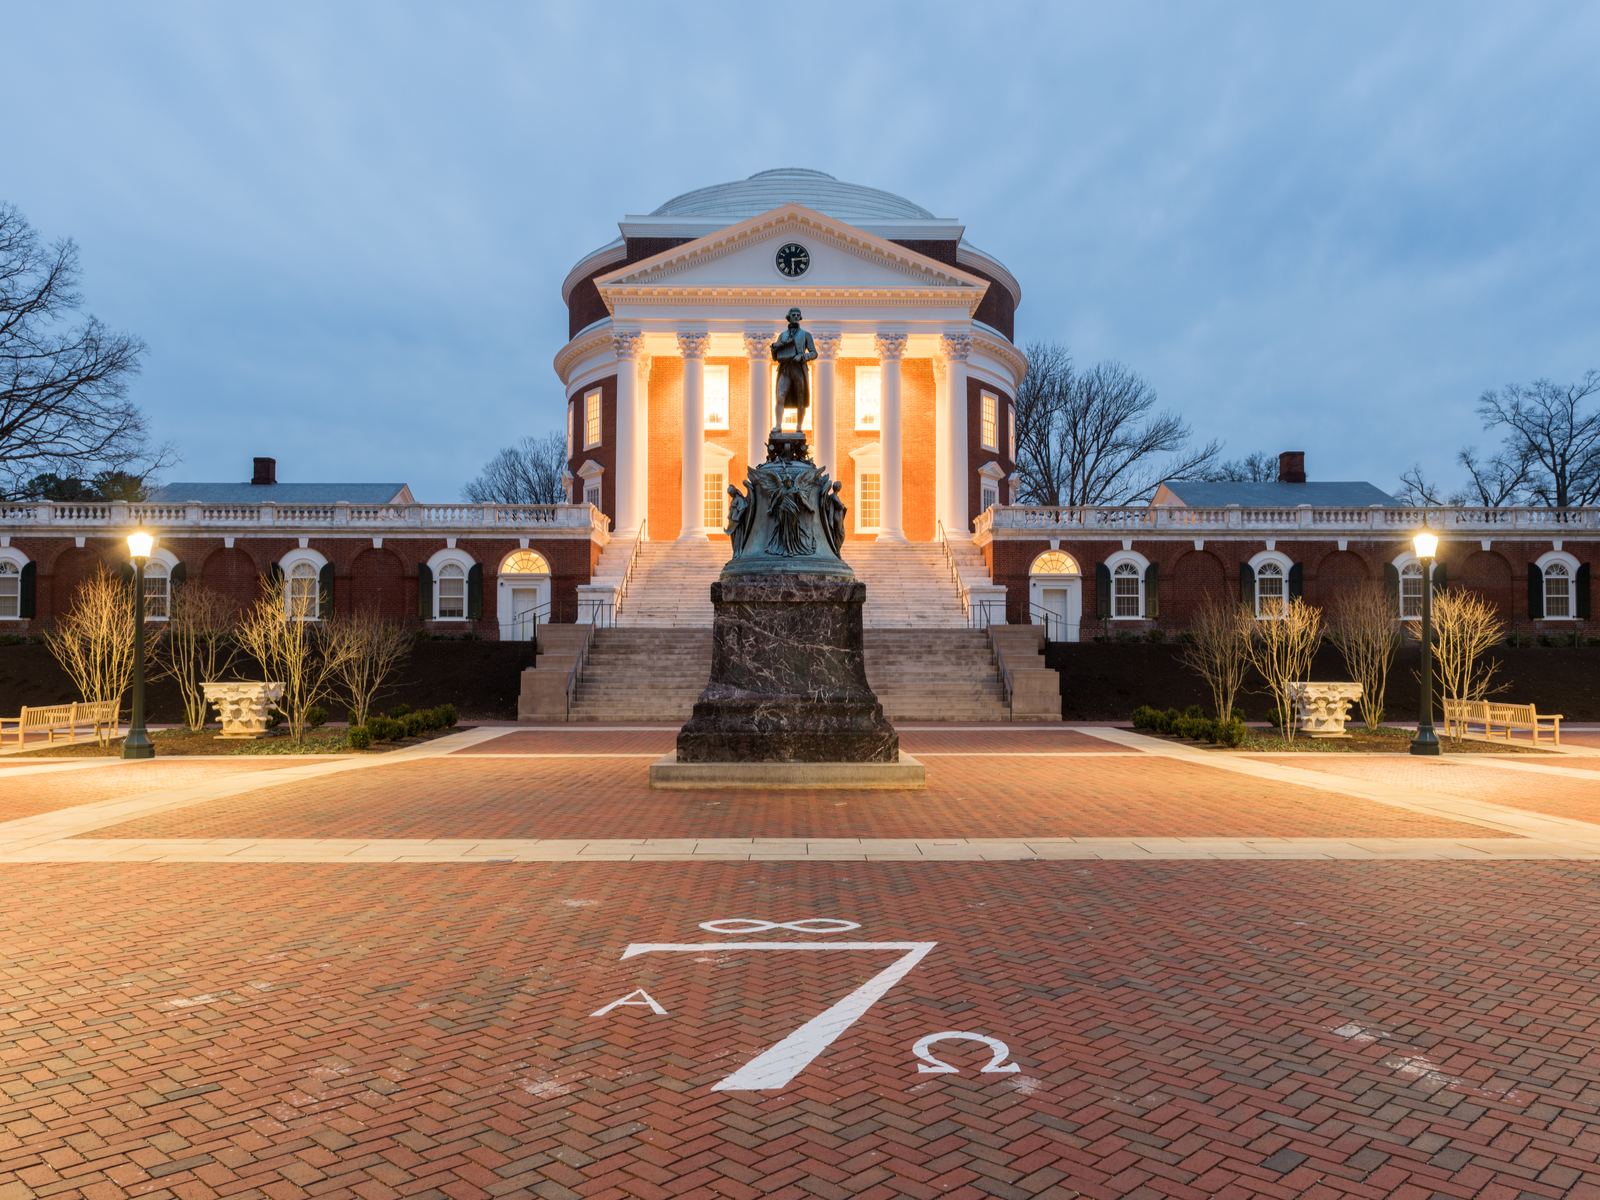 The iconic statue of Thomas Jefferson in front of a classic building with six columns and clock at the top at University of Virginia in Virginia, which is considered one of the most beautiful college campuses